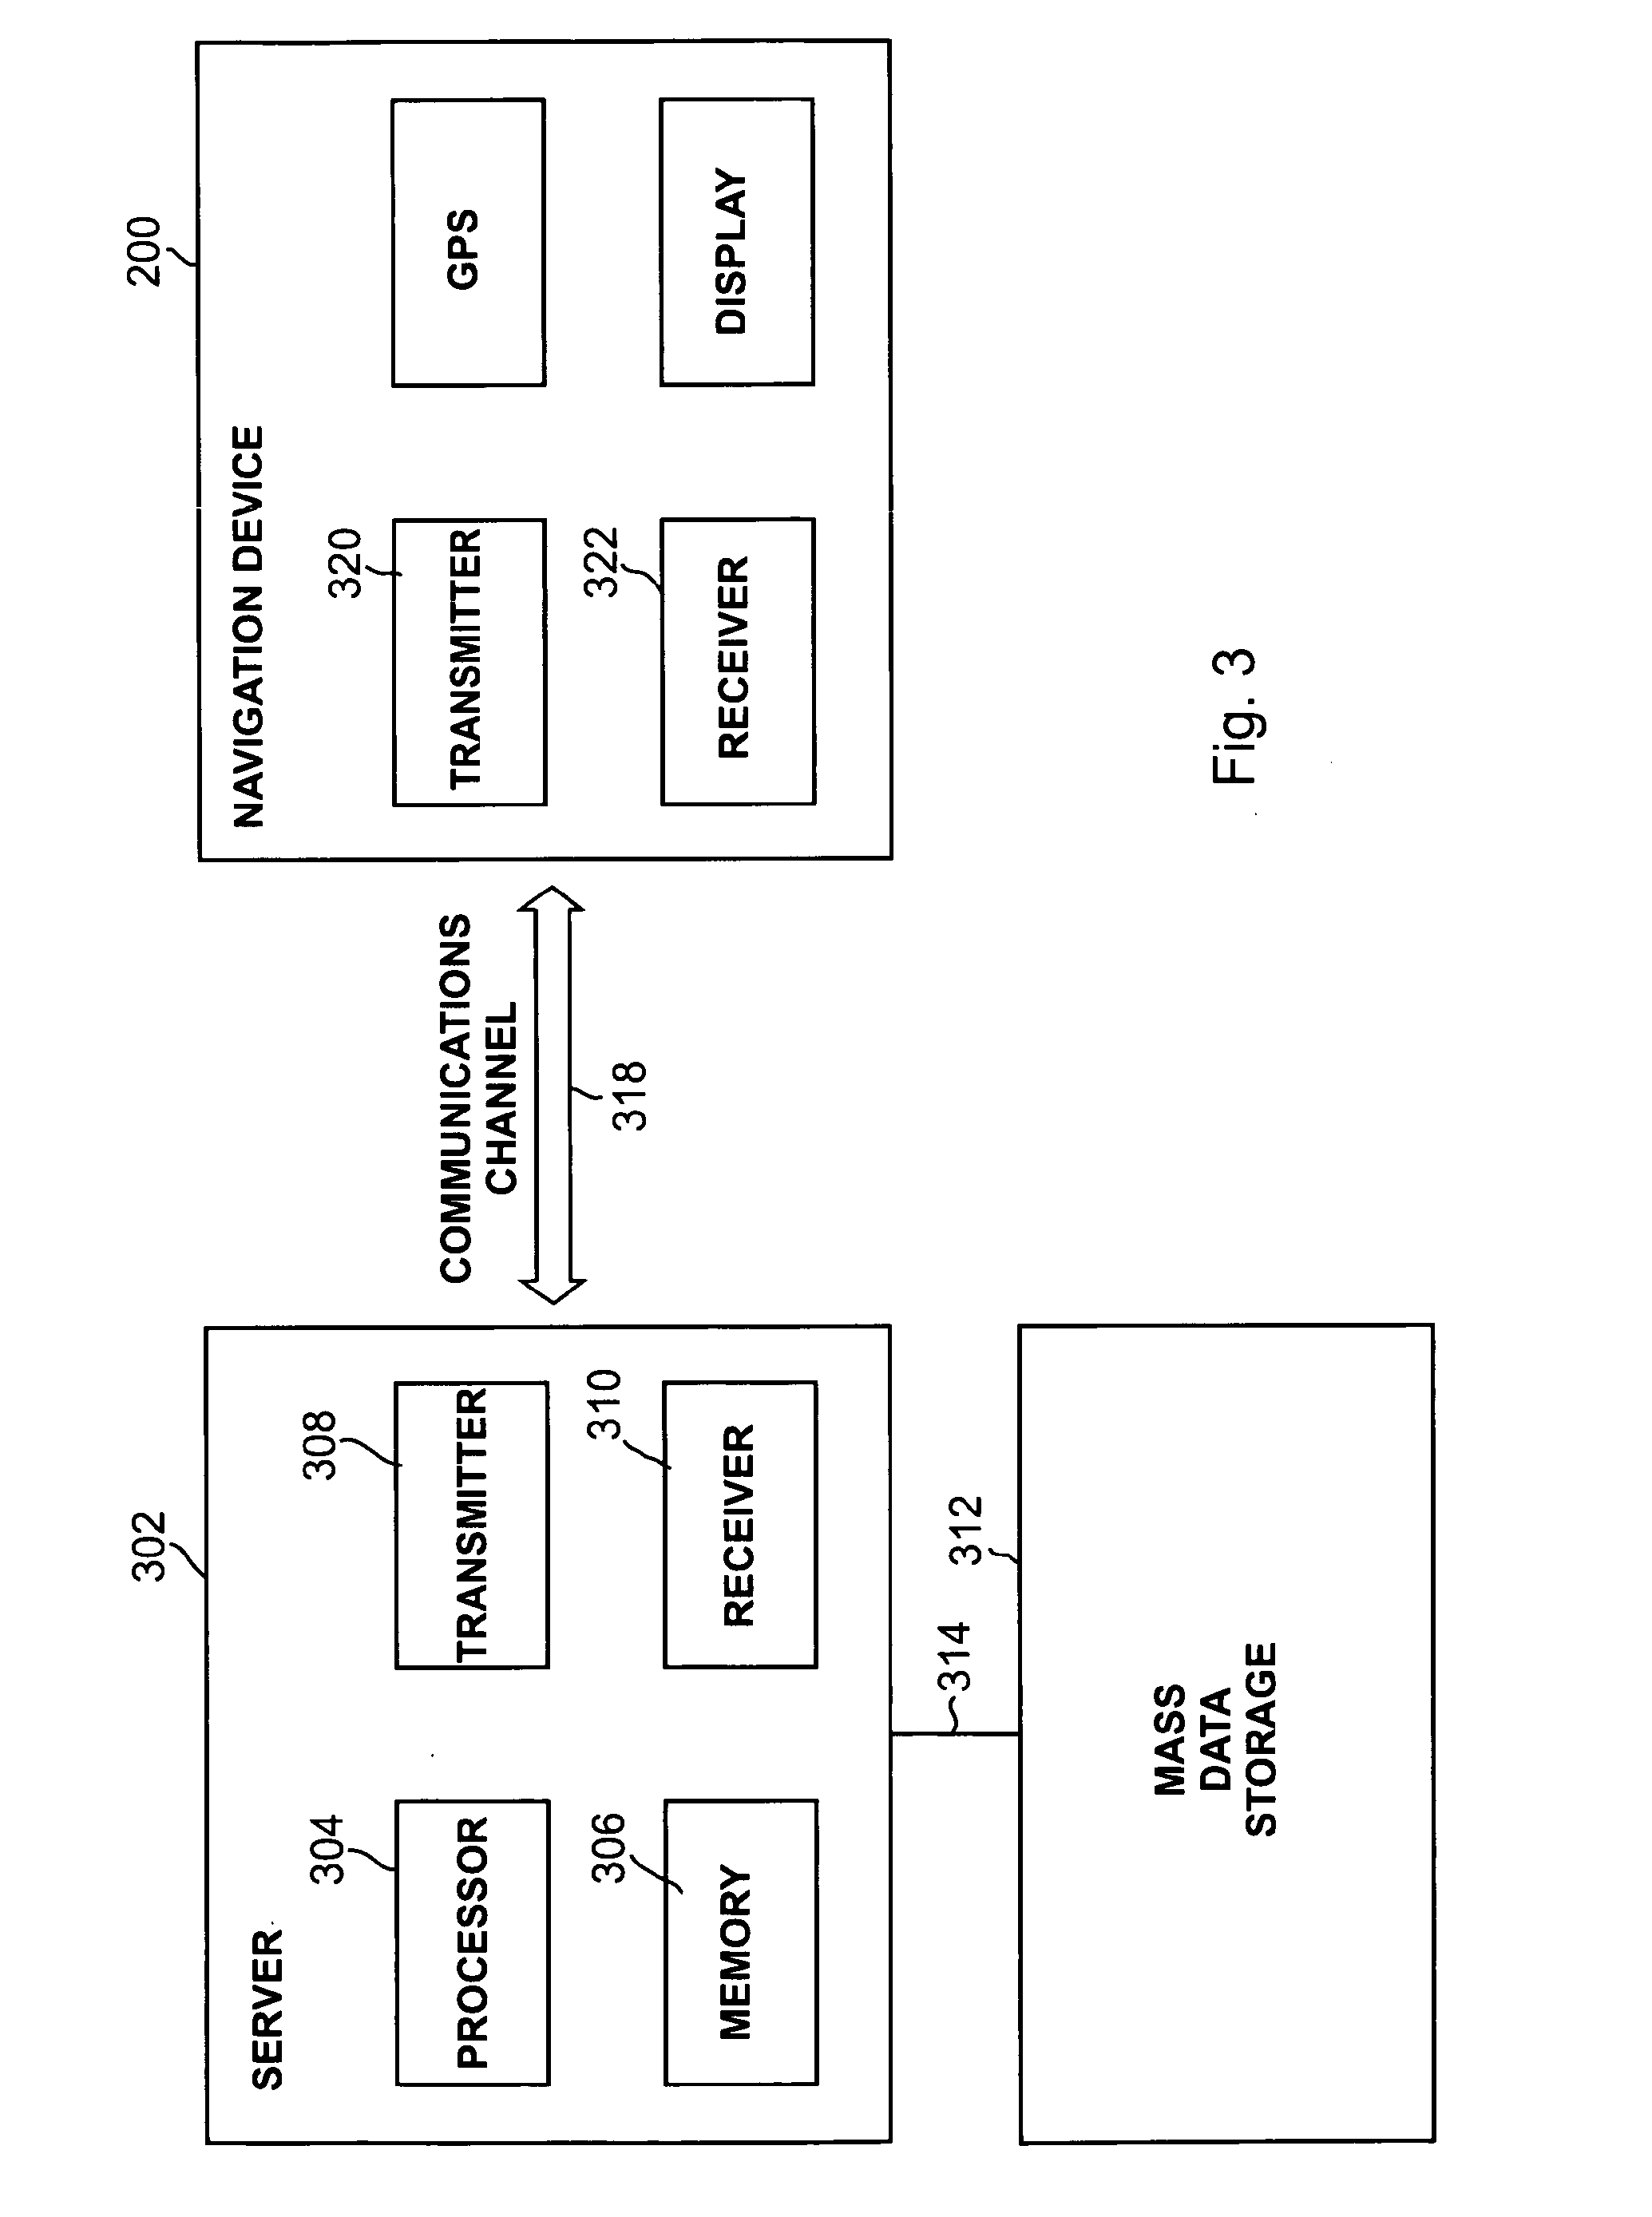 Methods and systems of providing information using a navigation apparatus